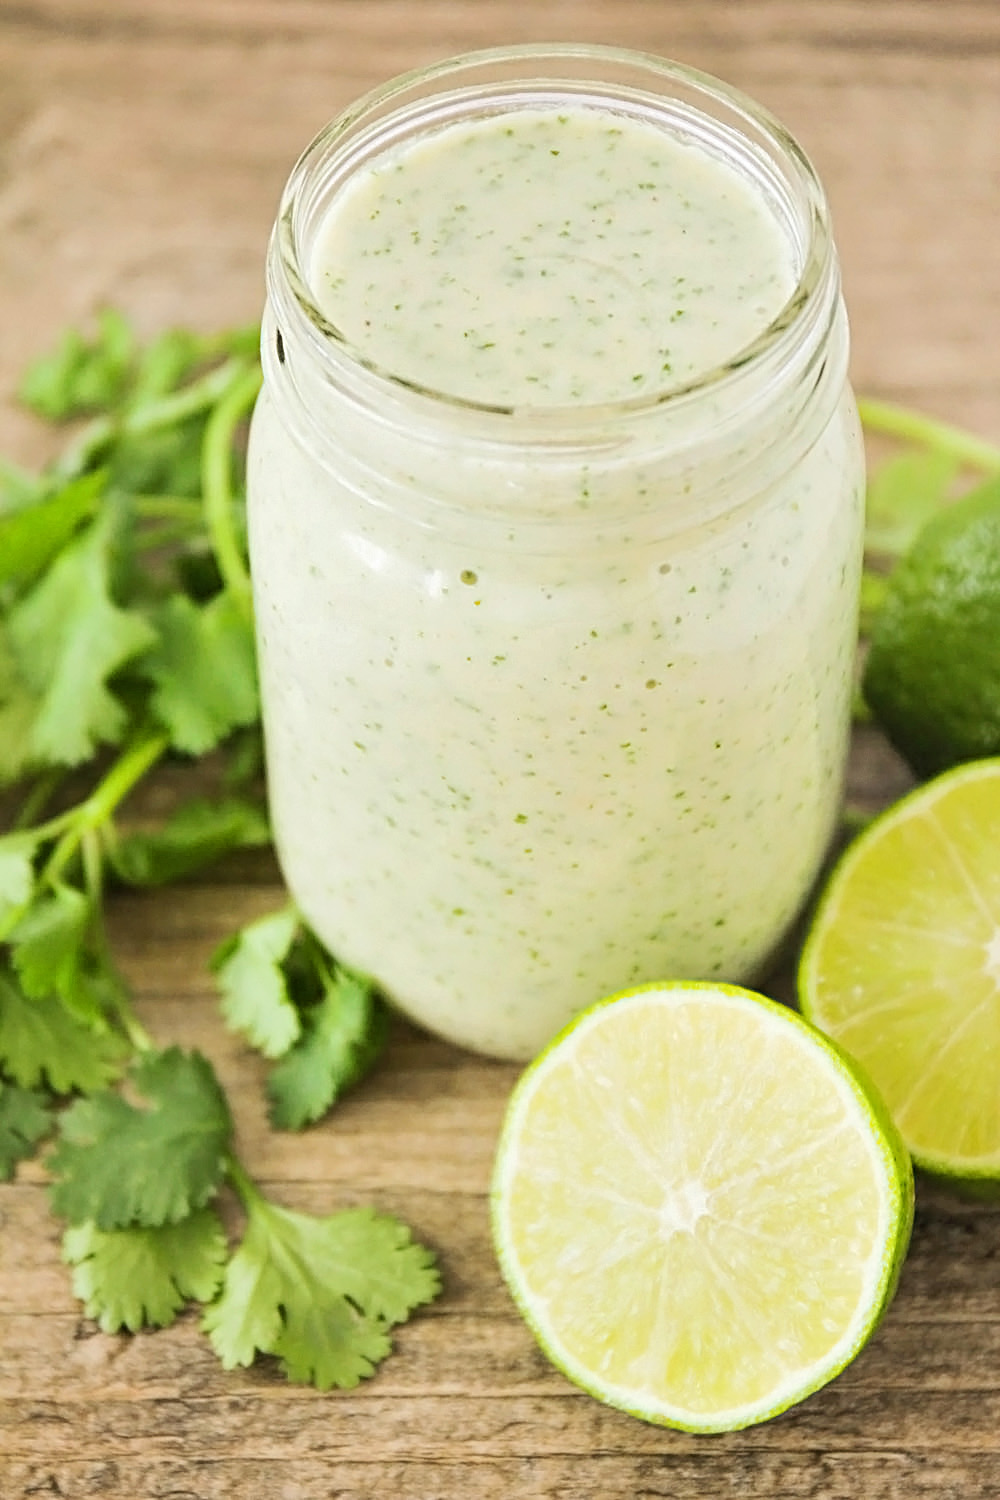 This creamy and delicious cilantro lime dressing takes only a few minutes to make!